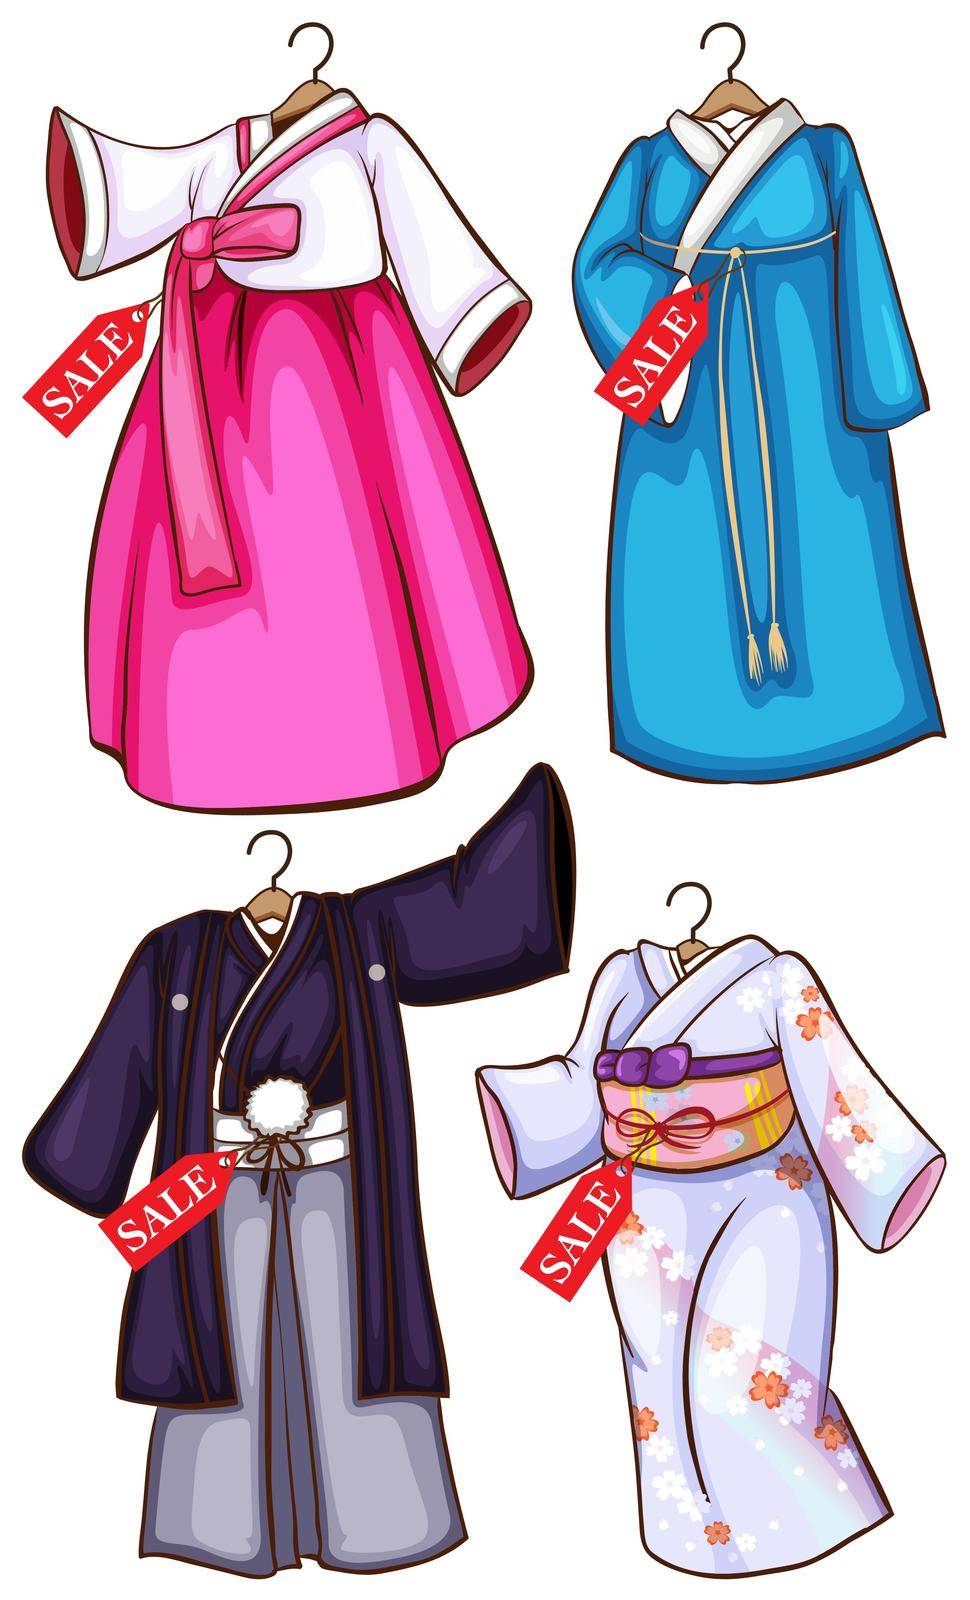 Simple sketches of the Asian dresses on a white background